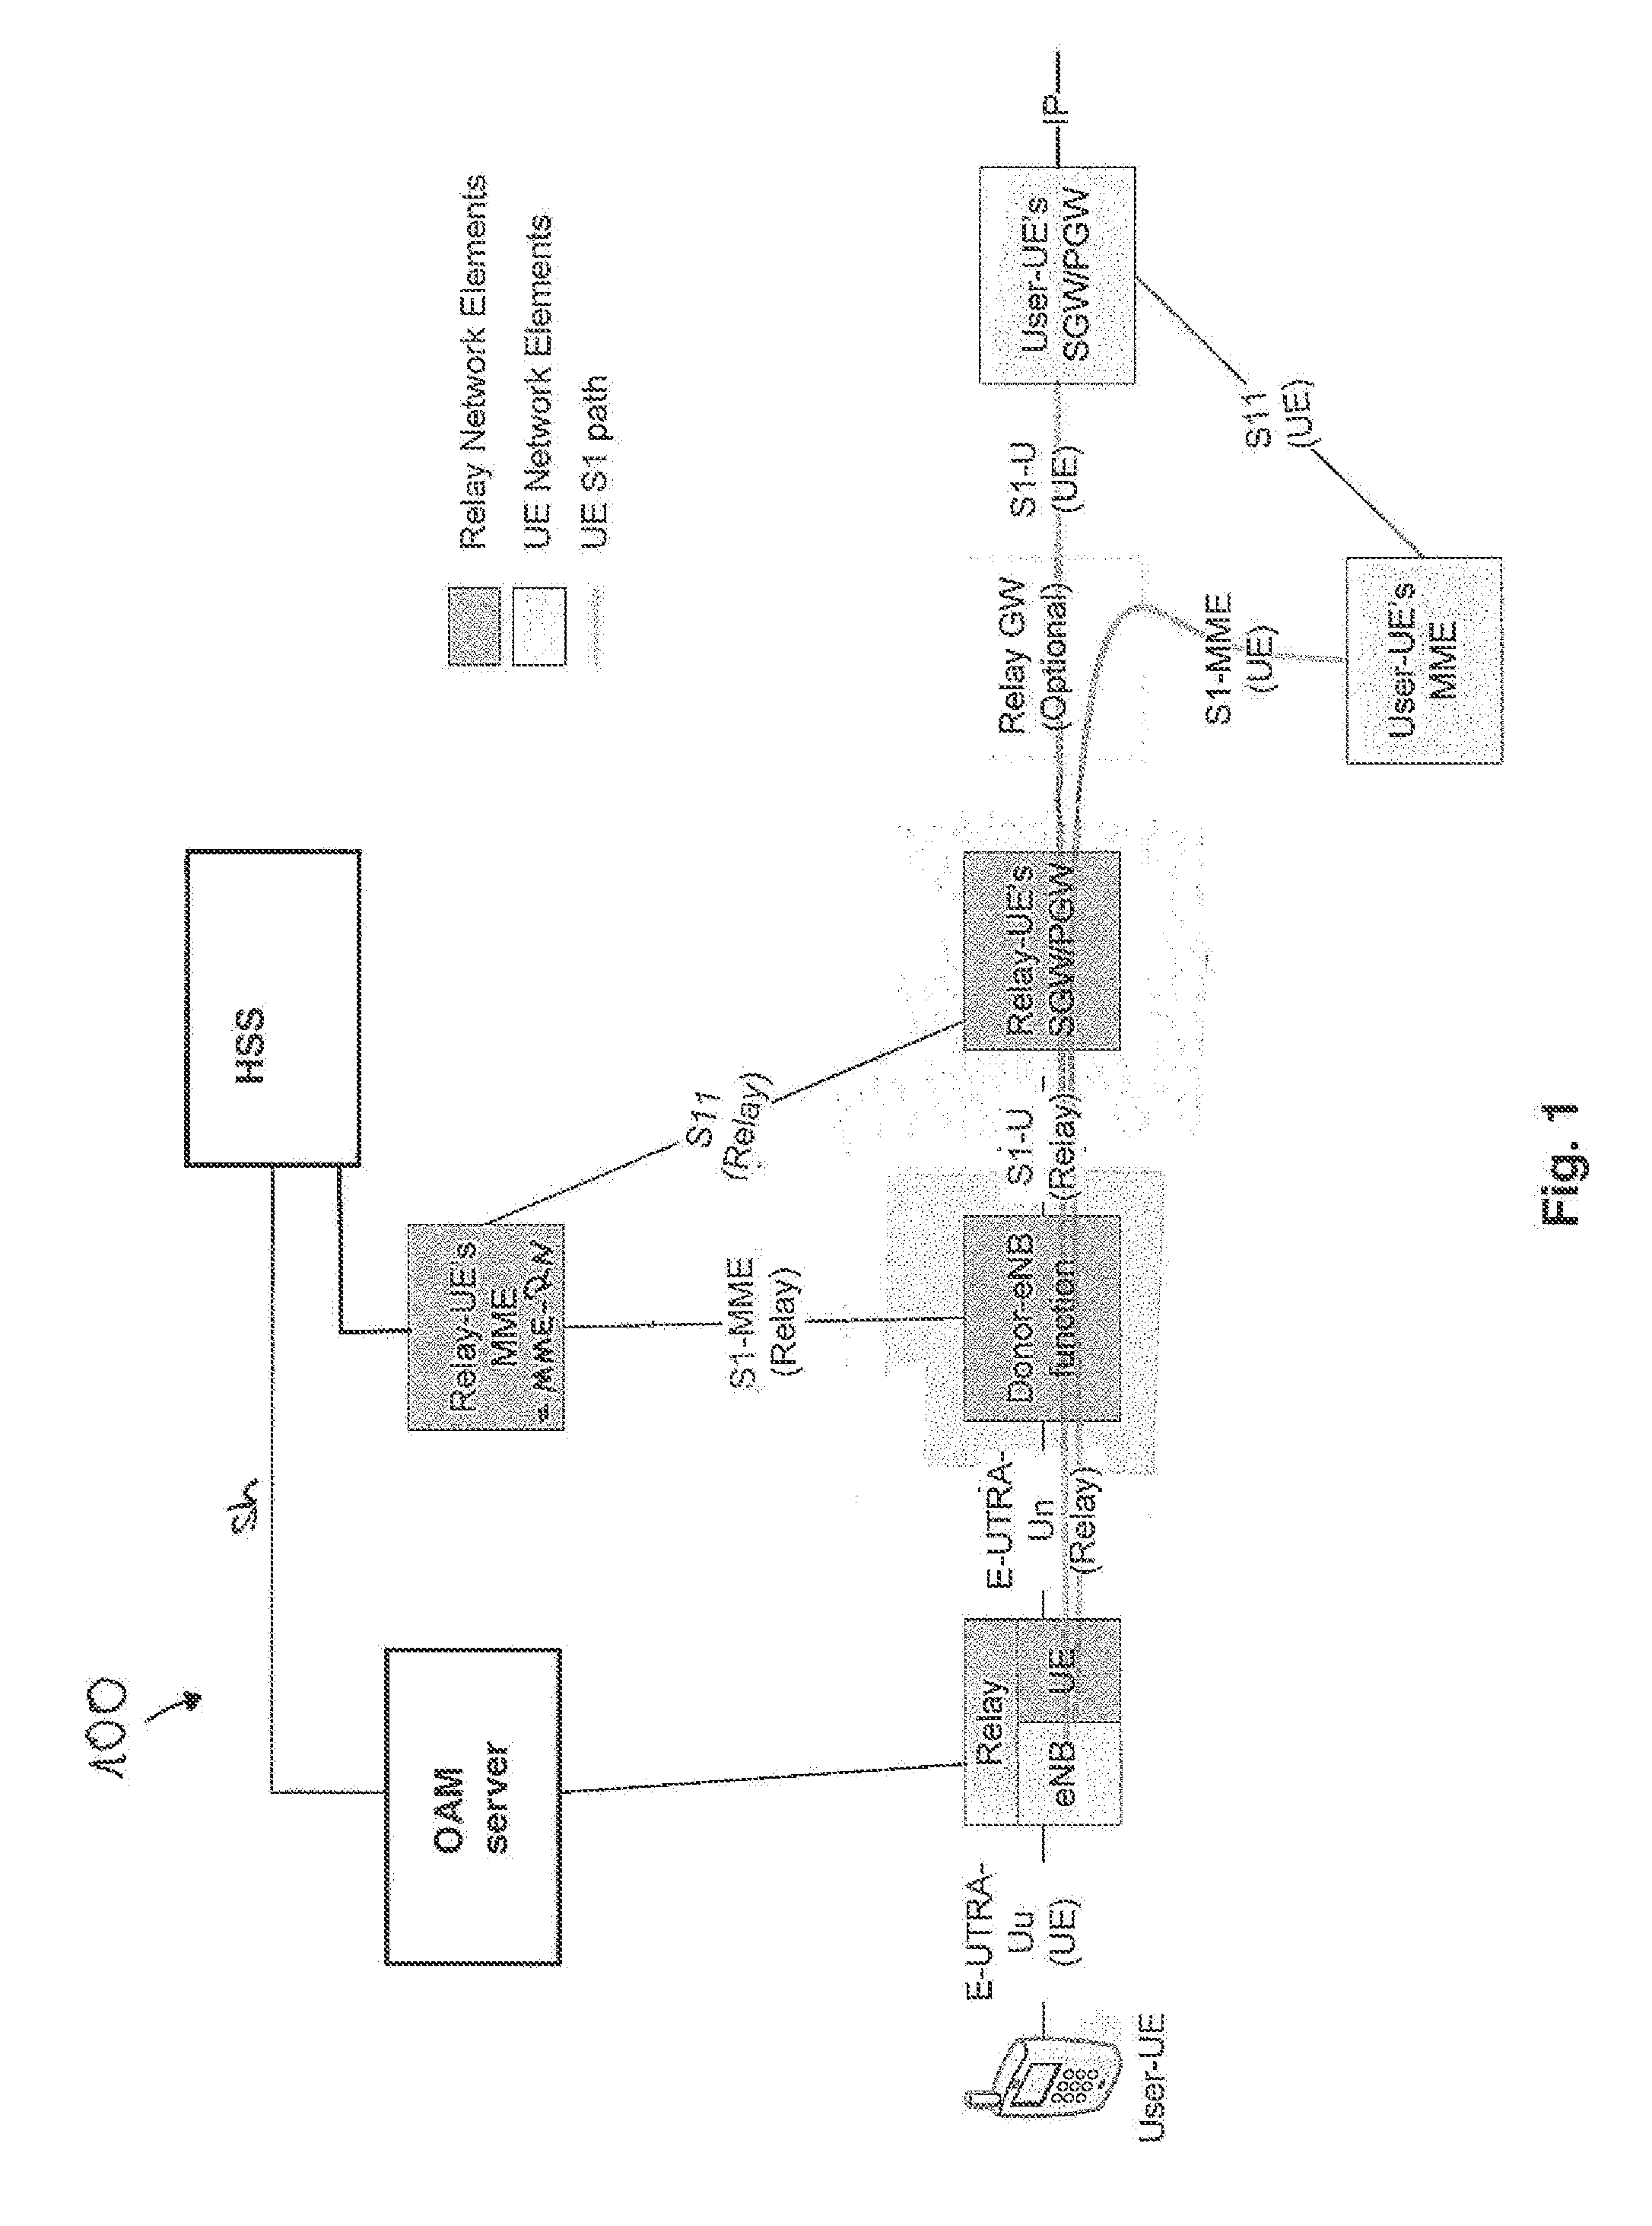 Method for establishing a secure and authorized connection between a smart card and a device in a network